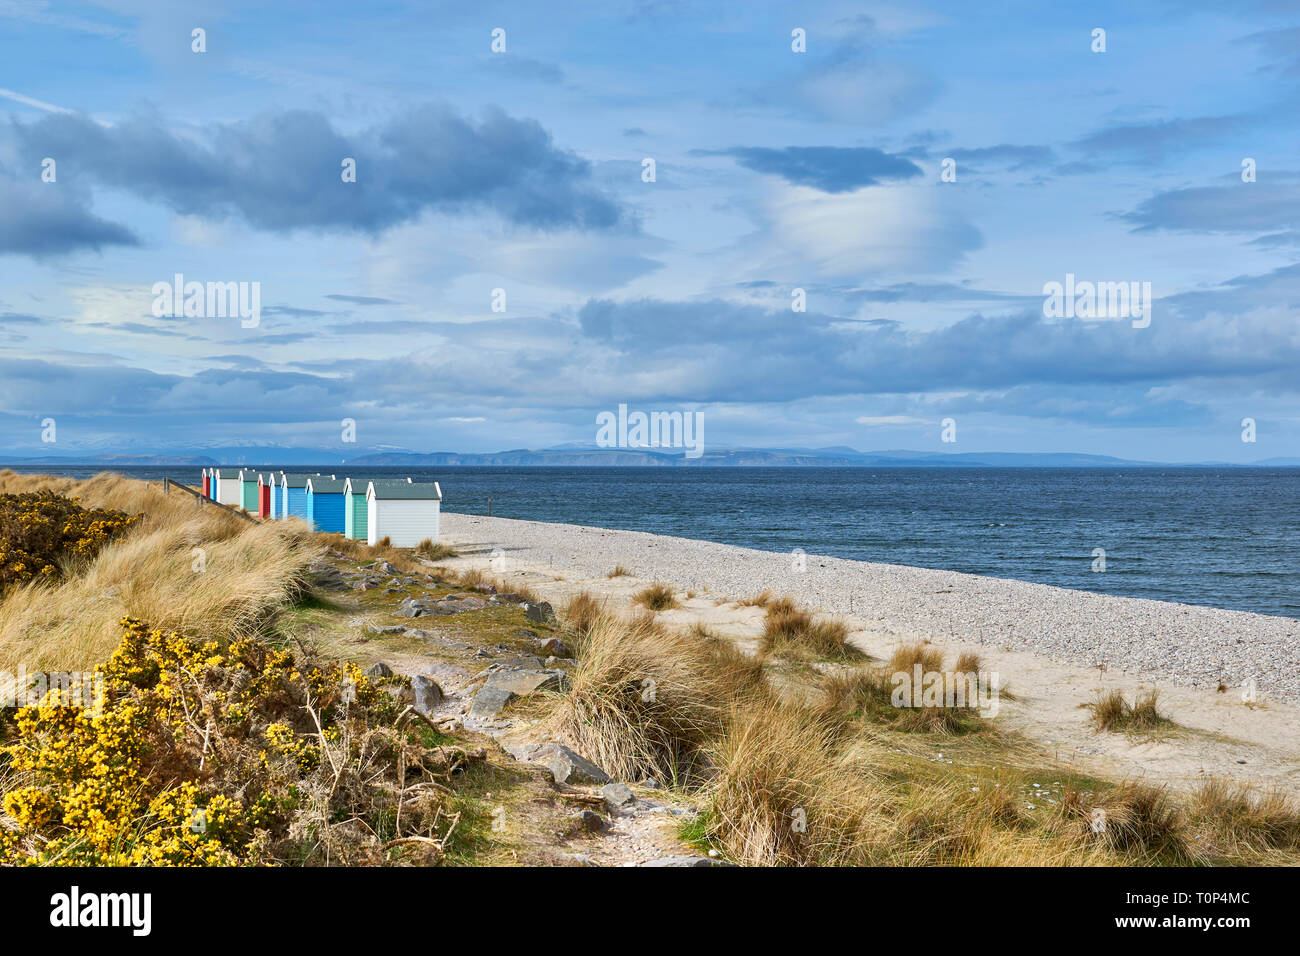 FINDHORN BEACH MORAY FIRTH SCOTLAND TEN COLOURED CHALETS OR BEACH HUTS SNOW OVER THE HILLS AND BLACK ISLE Stock Photo